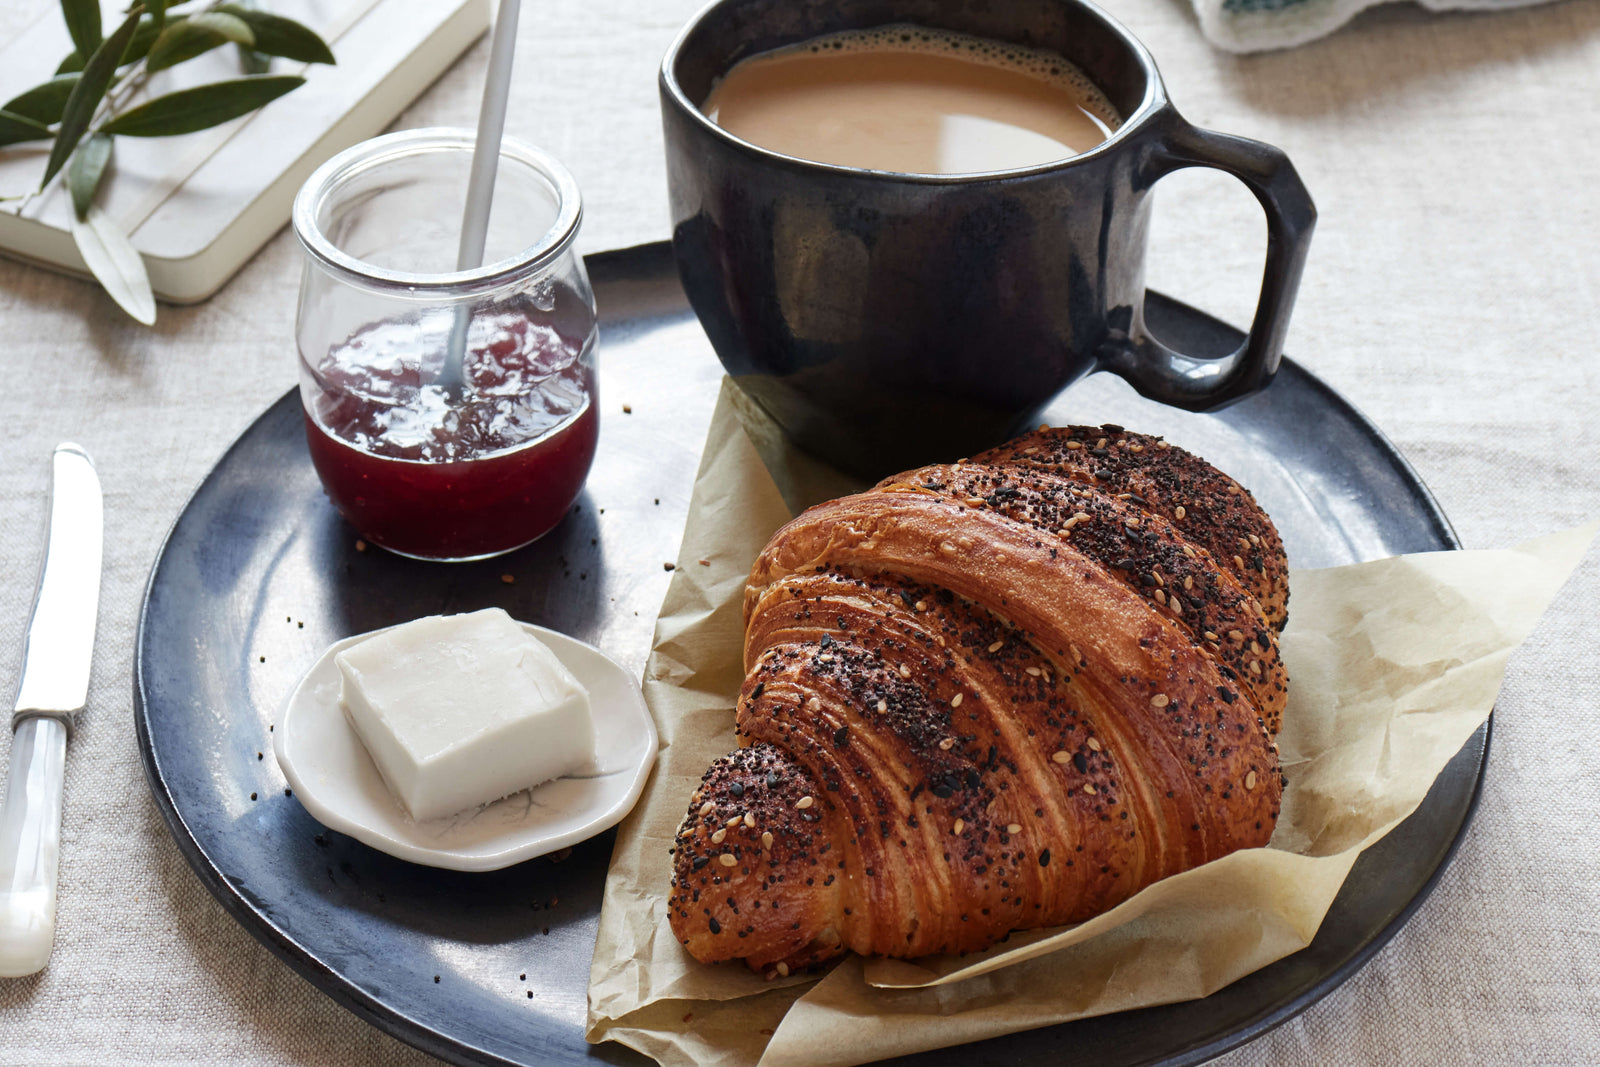 Croissant and Jam from Bourke Street Bakery on a DBO Home Bare Salad Bowl in Mussel along with a DBO Home Battuto Mug filled with coffee and a vintage DBO dipping bowl with cream cheese on a brightly lit, linen covered table